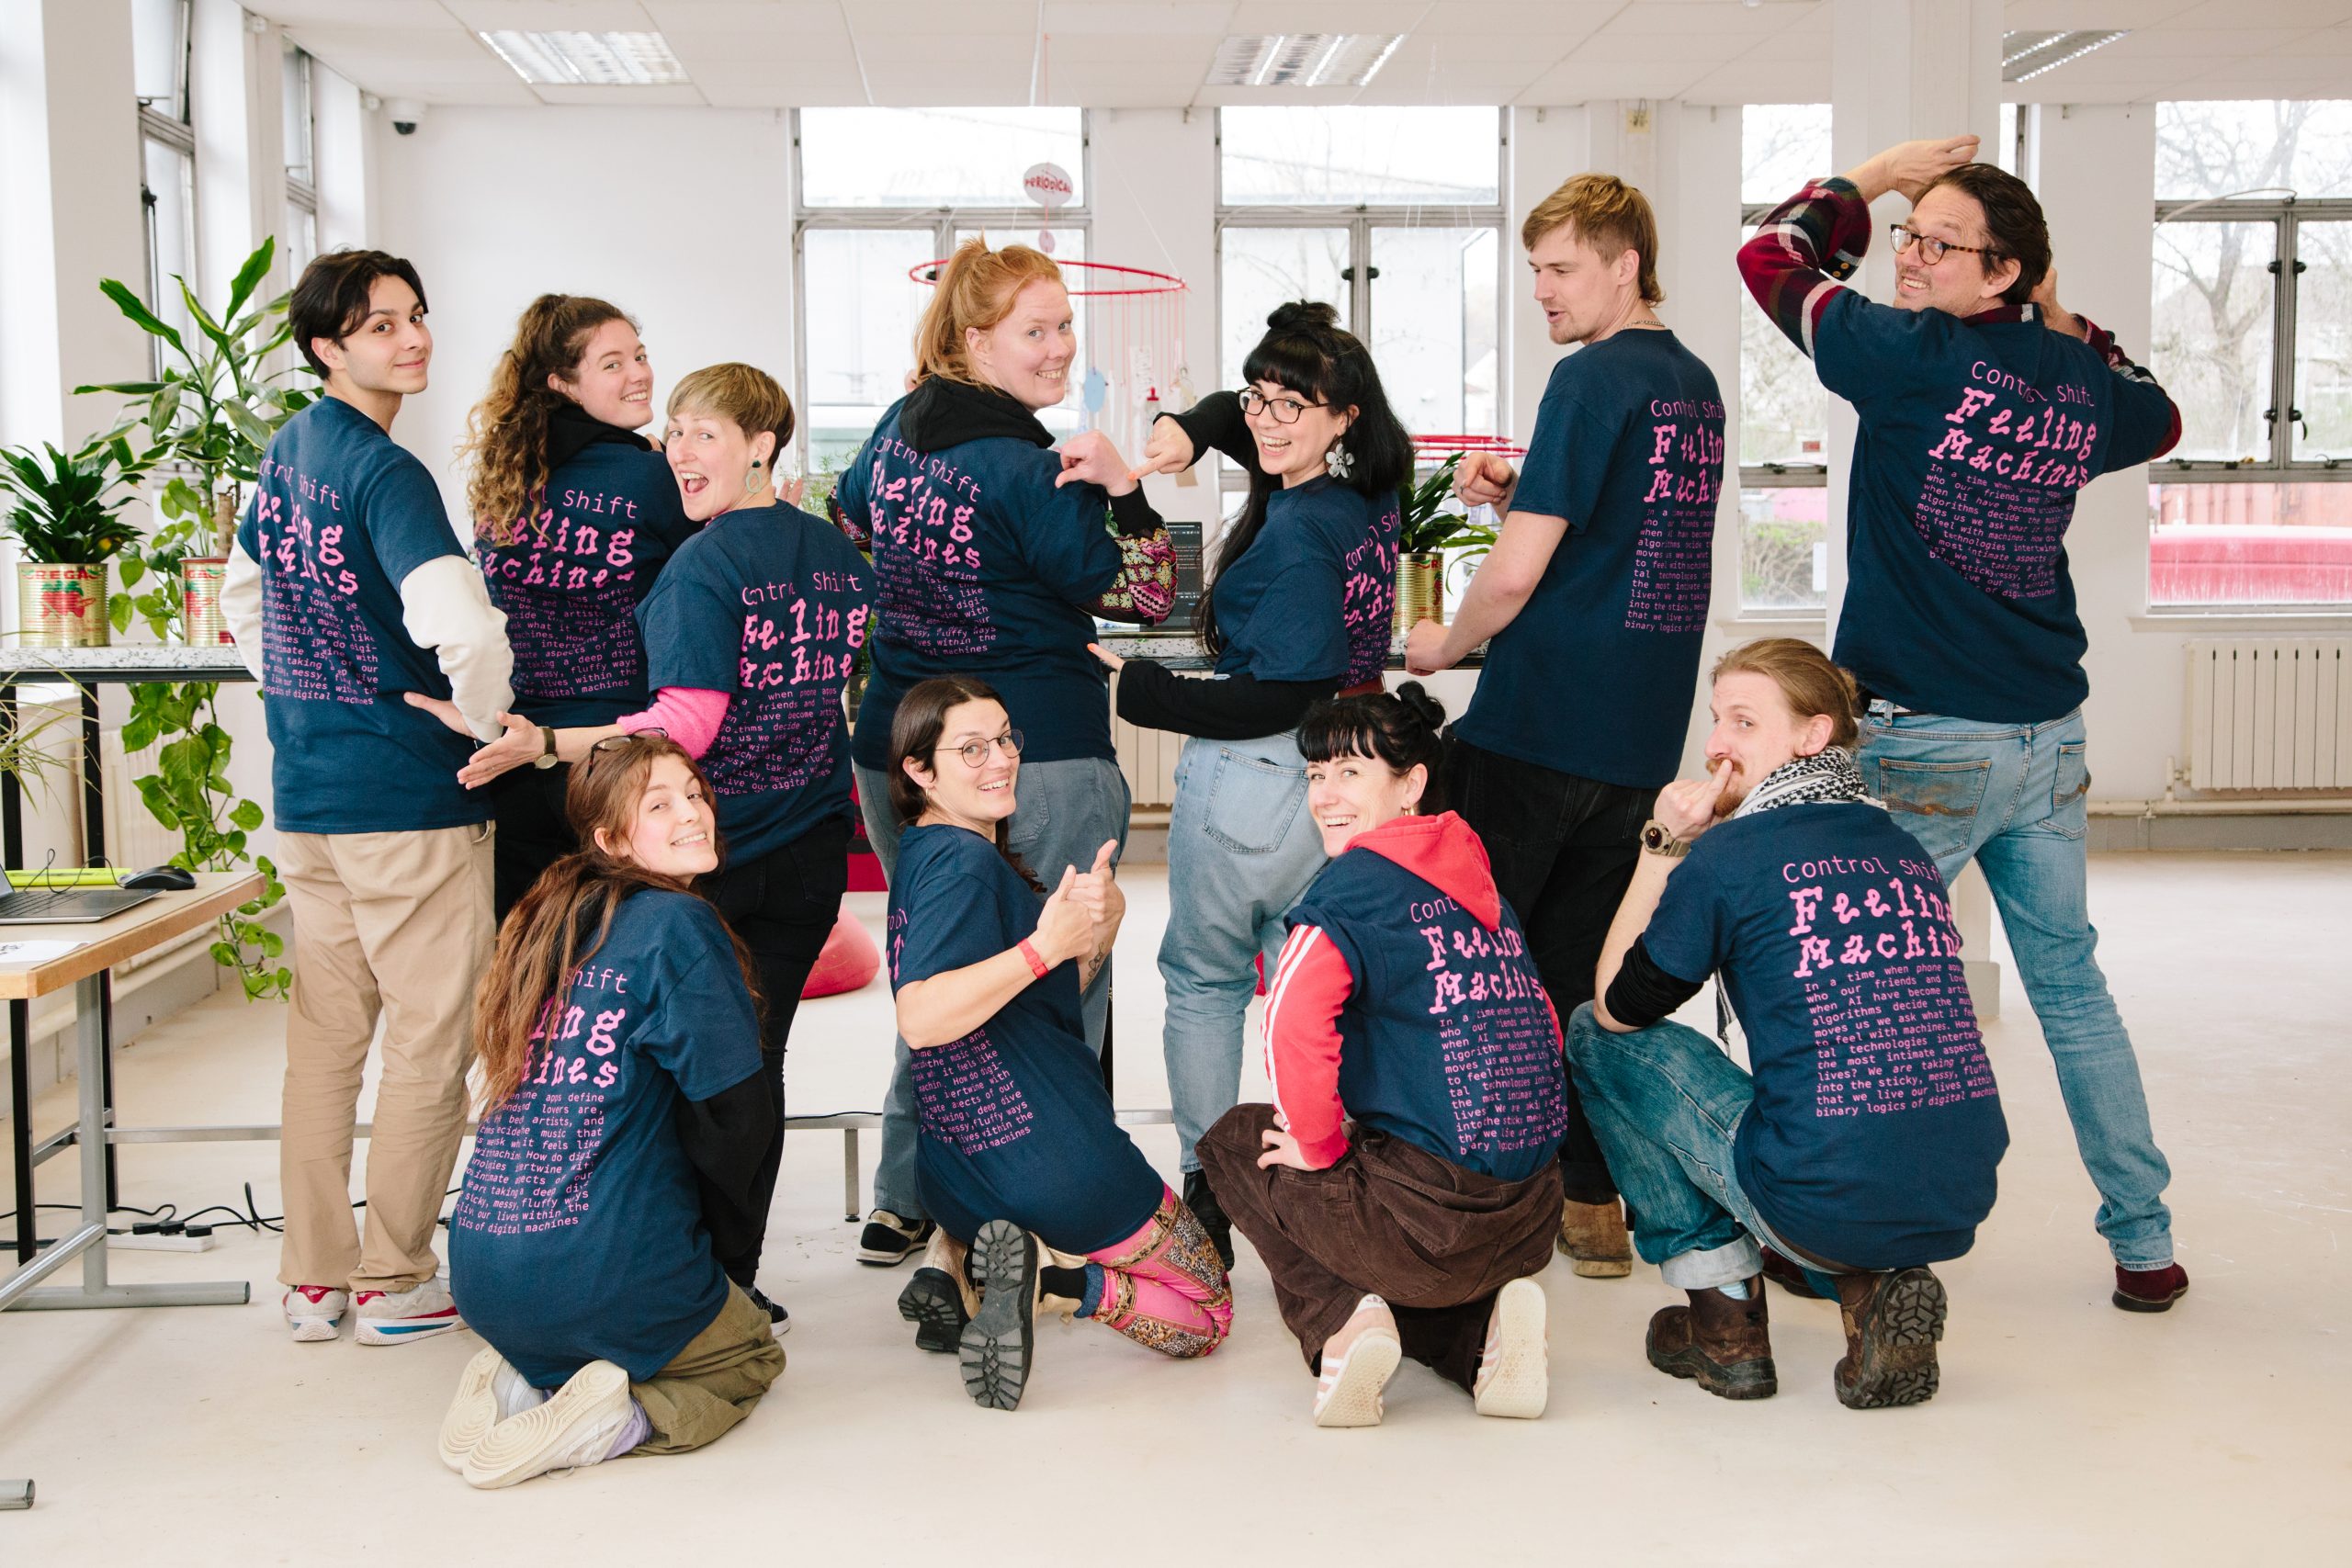 A group of people wearing matching dark blue t-shirts with pink text, playfully posing together. The shirts read 'Control Shift Feeling Machines'